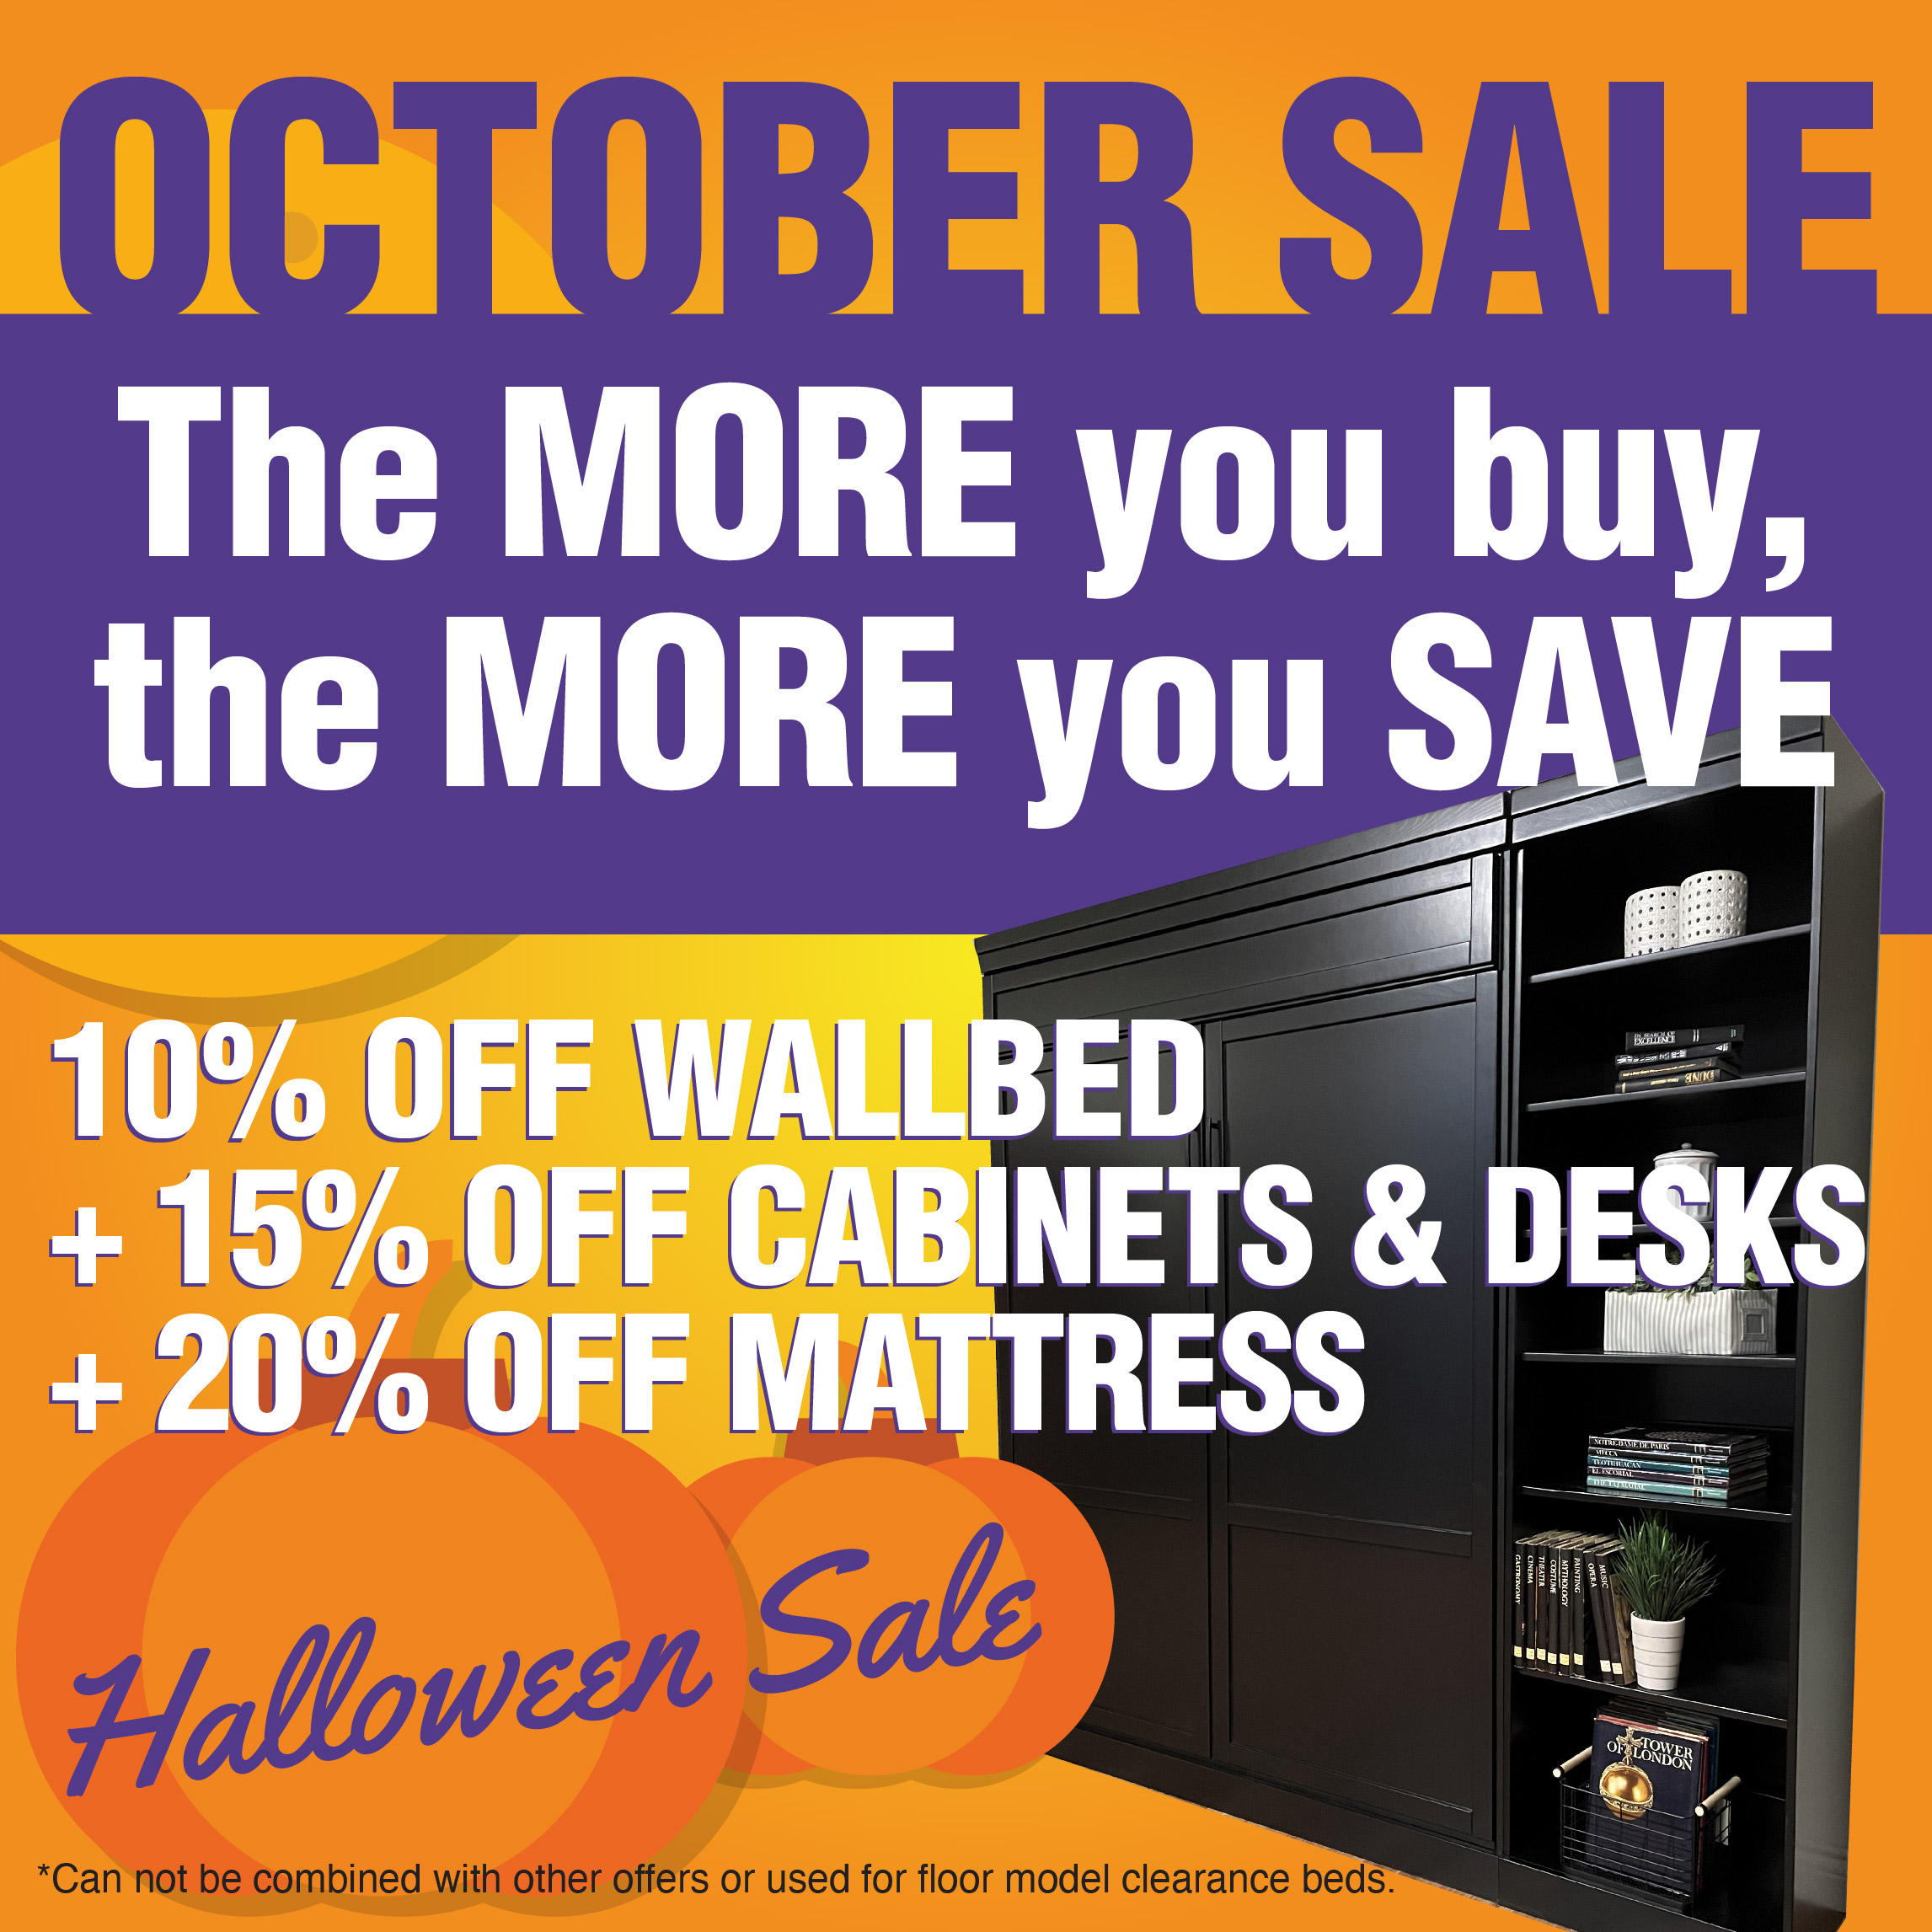 October 2022 Wall beds & Murphy Bed Sales Offers!
Get your wall bed & murphy bed while supplies last!